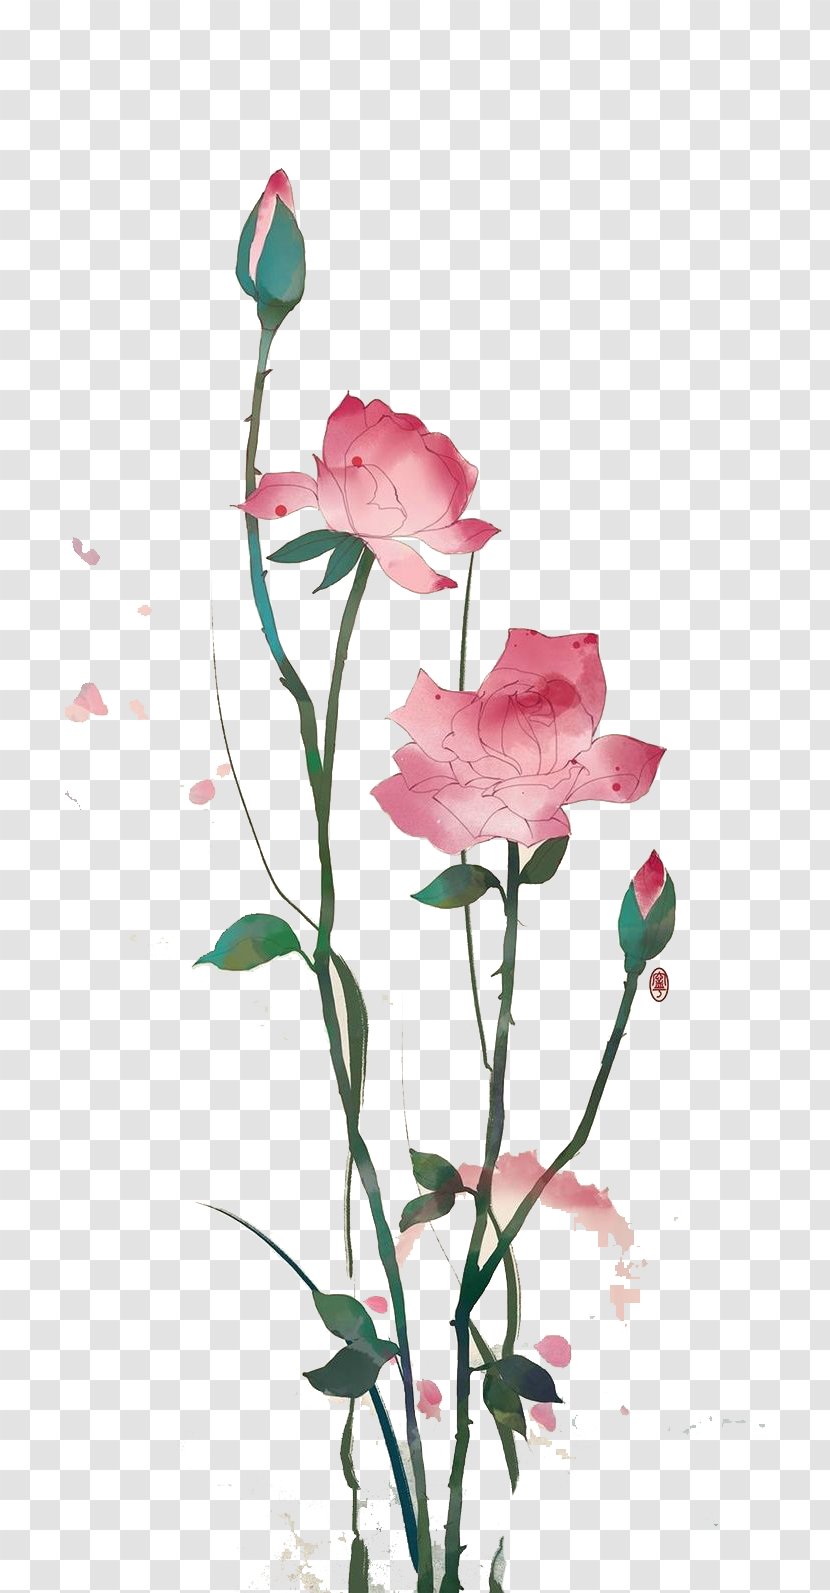 Poster - Flower Arranging - Hand-painted Lotus Transparent PNG